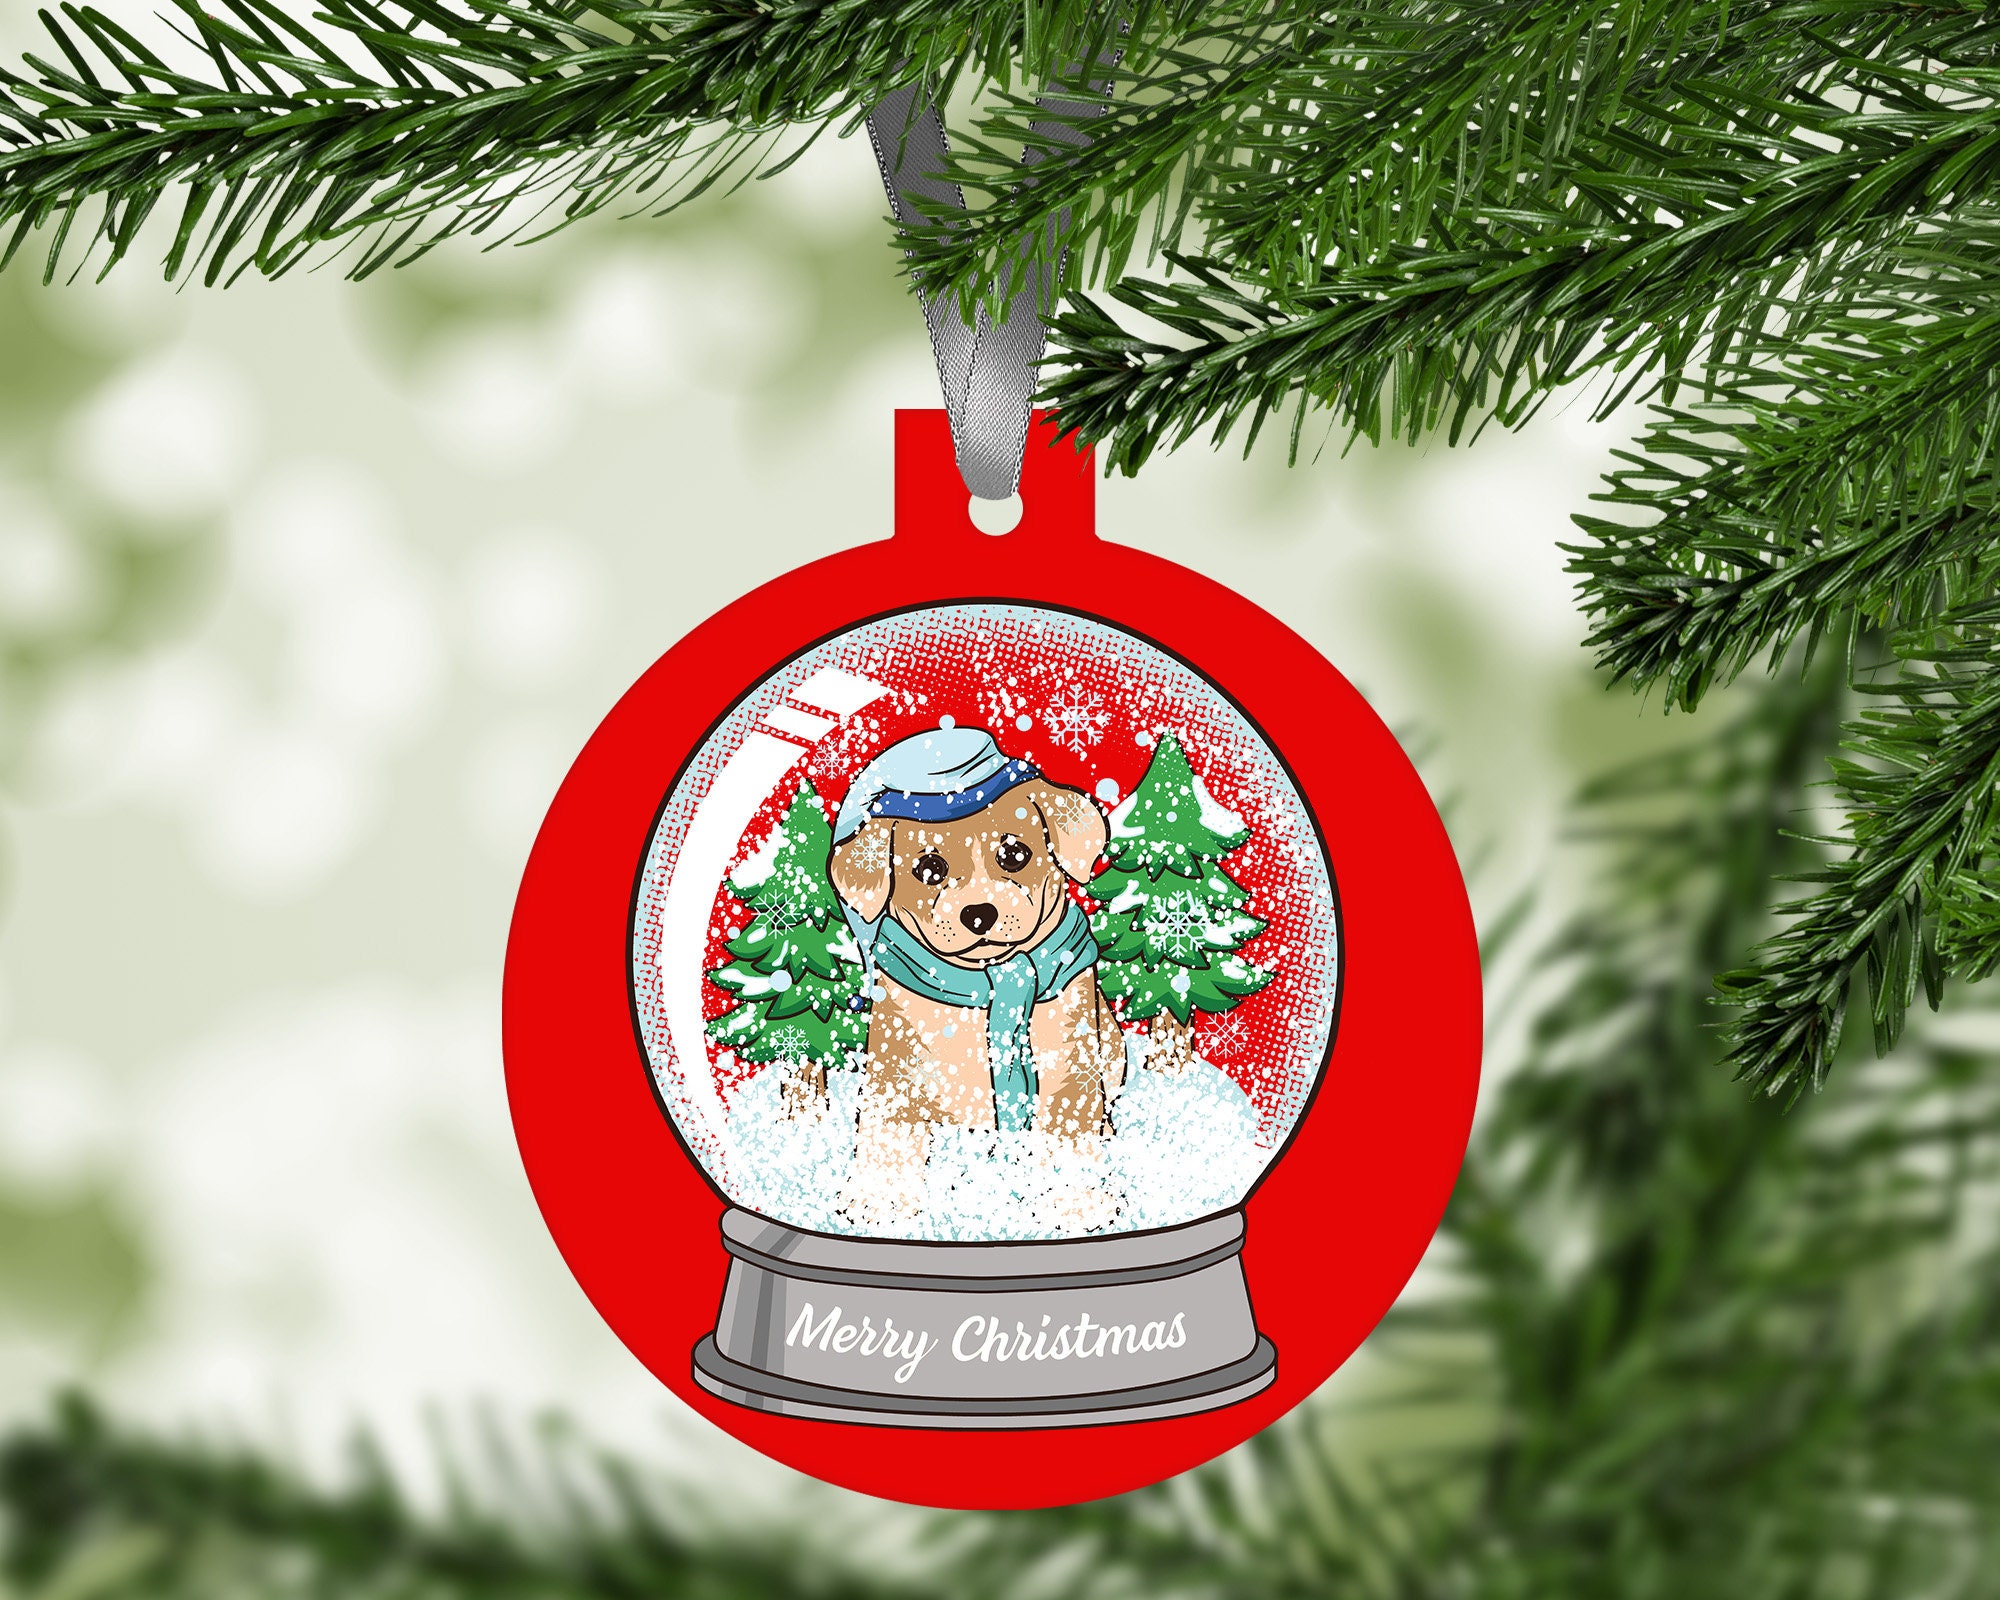 Custom Printed Aluminum Christmas Ornament with Personalization